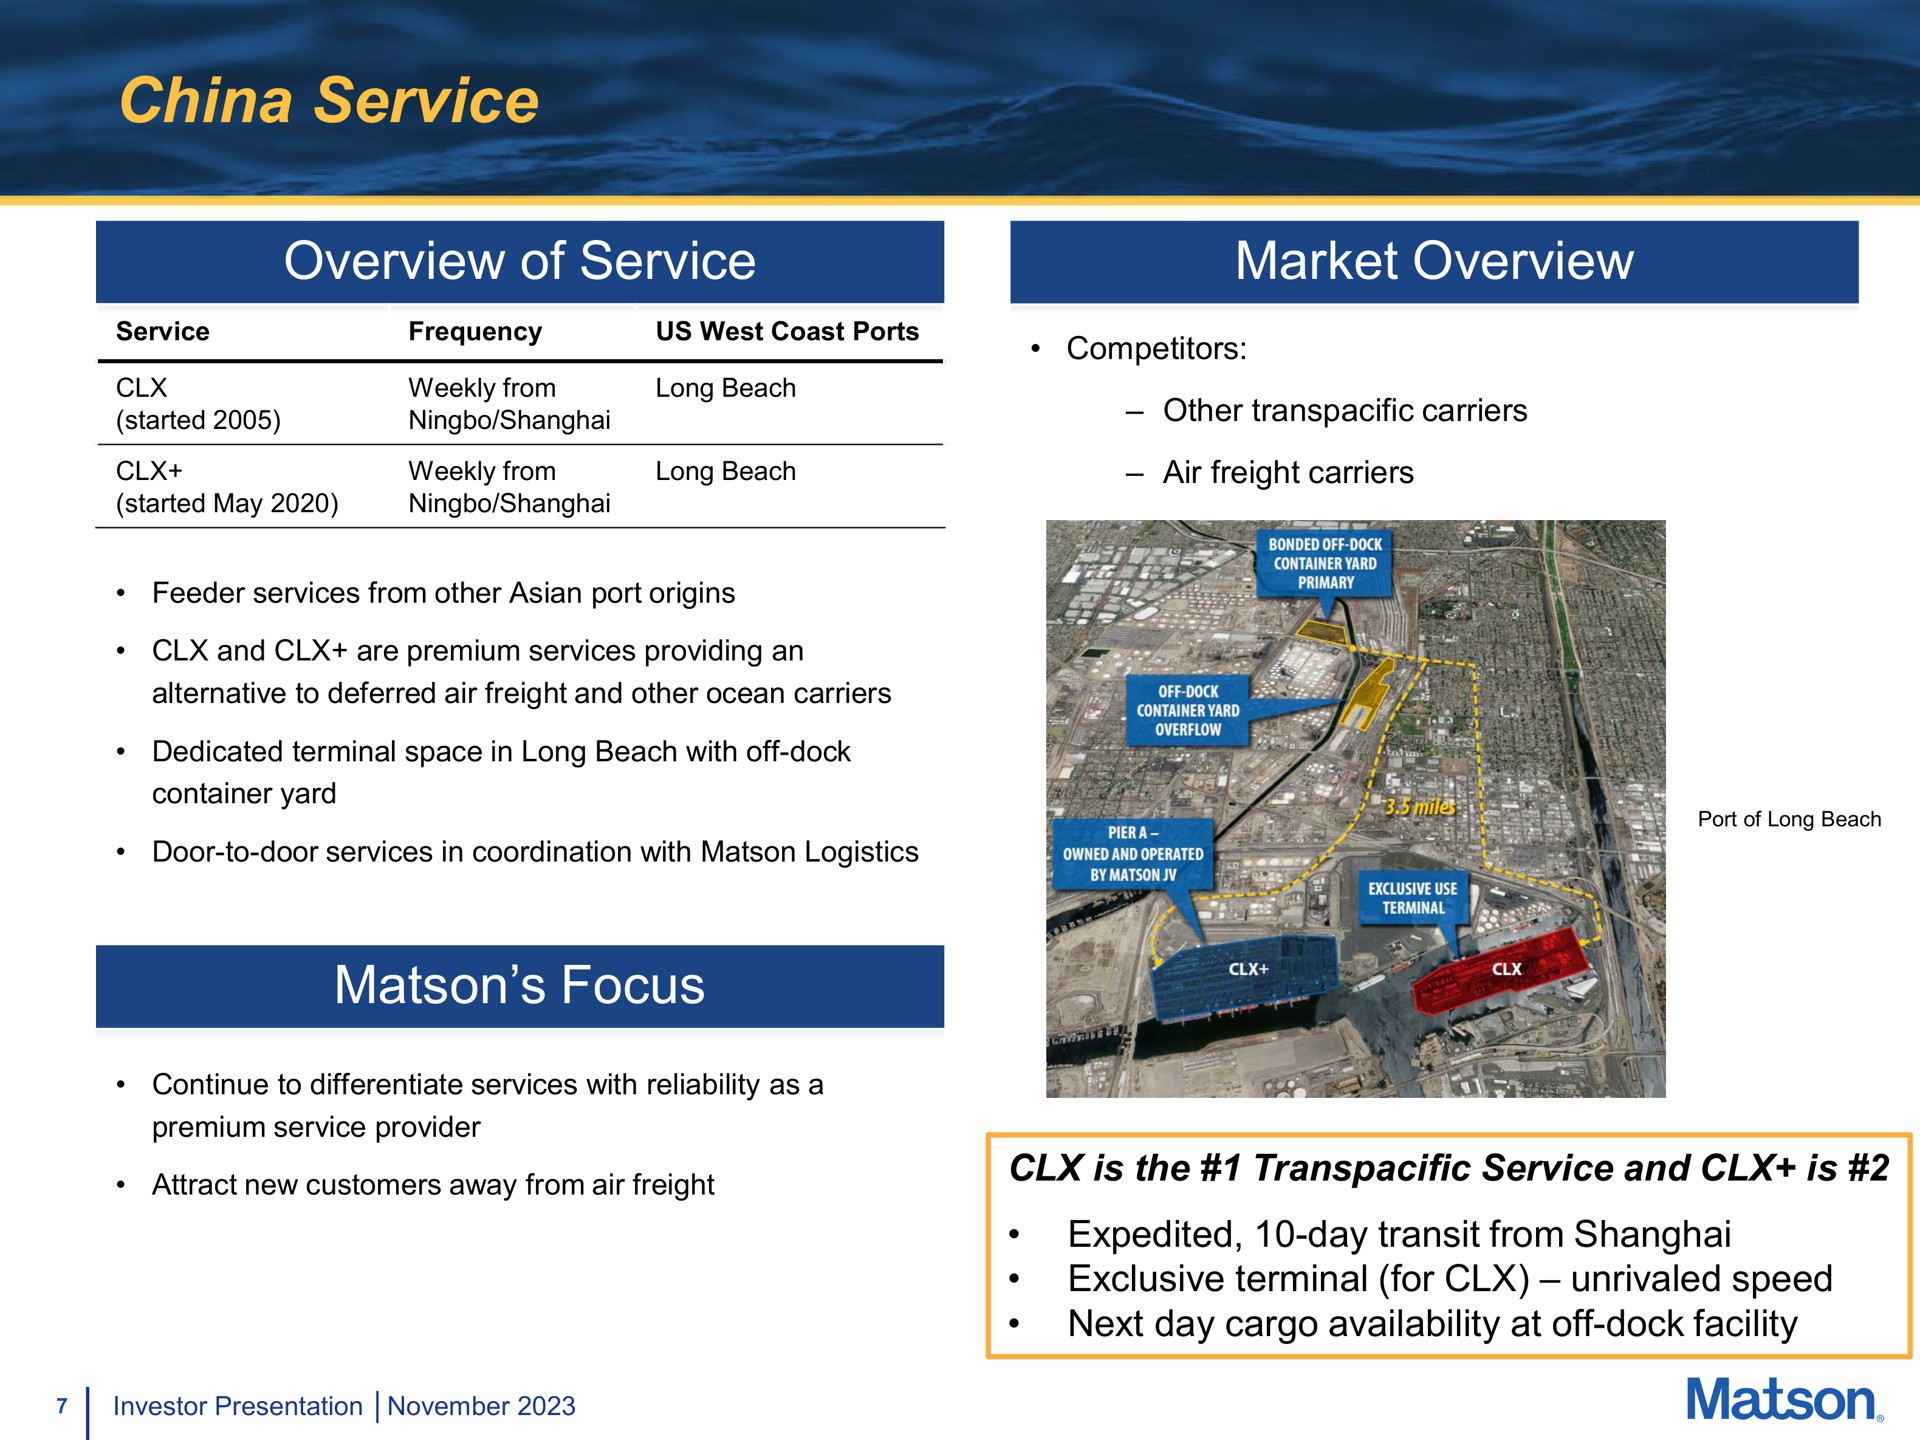 china service overview of service market overview focus is the transpacific service and is expedited day transit from shanghai exclusive terminal for unrivaled speed next day cargo availability at off dock facility | Matson